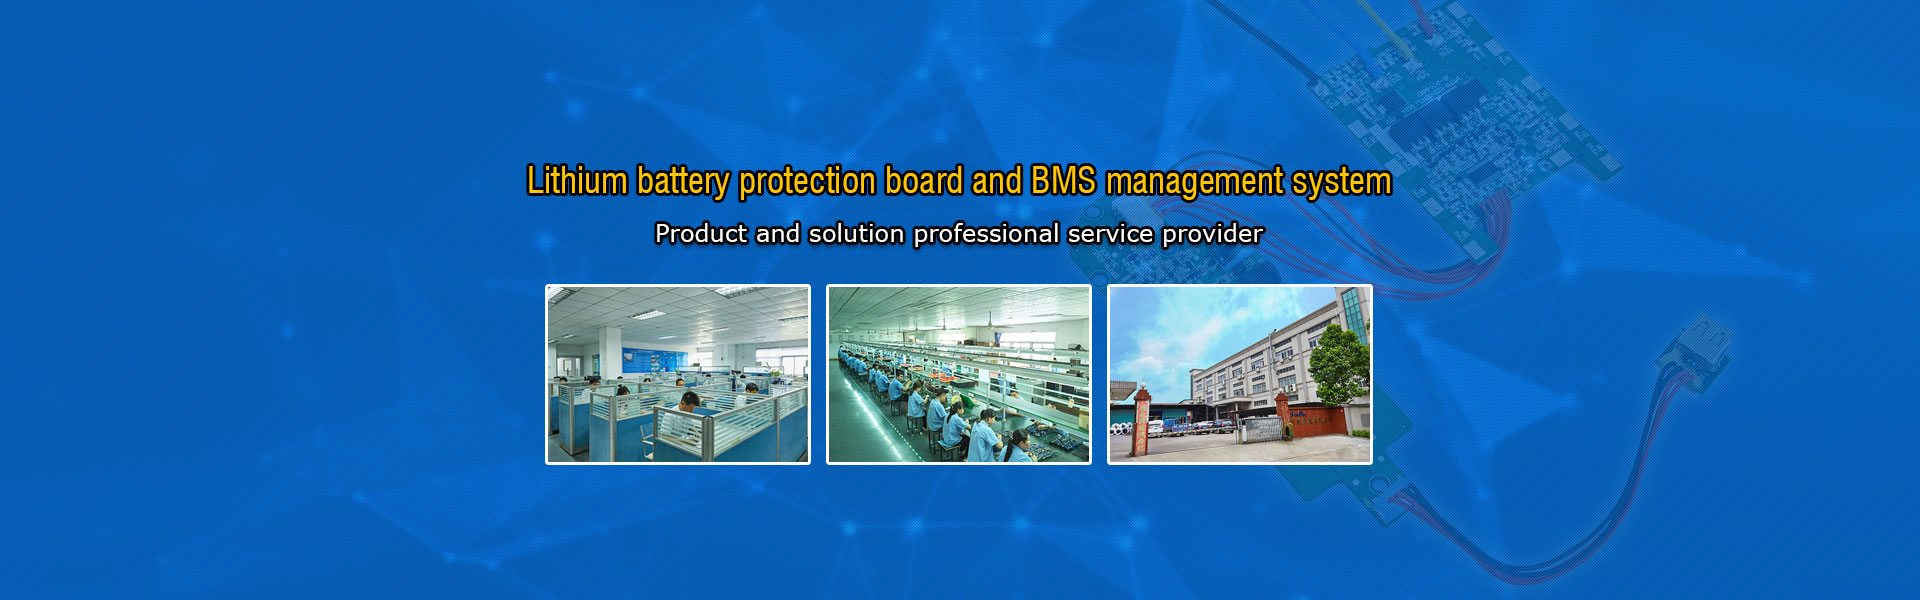 Dongguan BestWay Technology Co., LTD.,Professional manufacturer of battery pack protection board